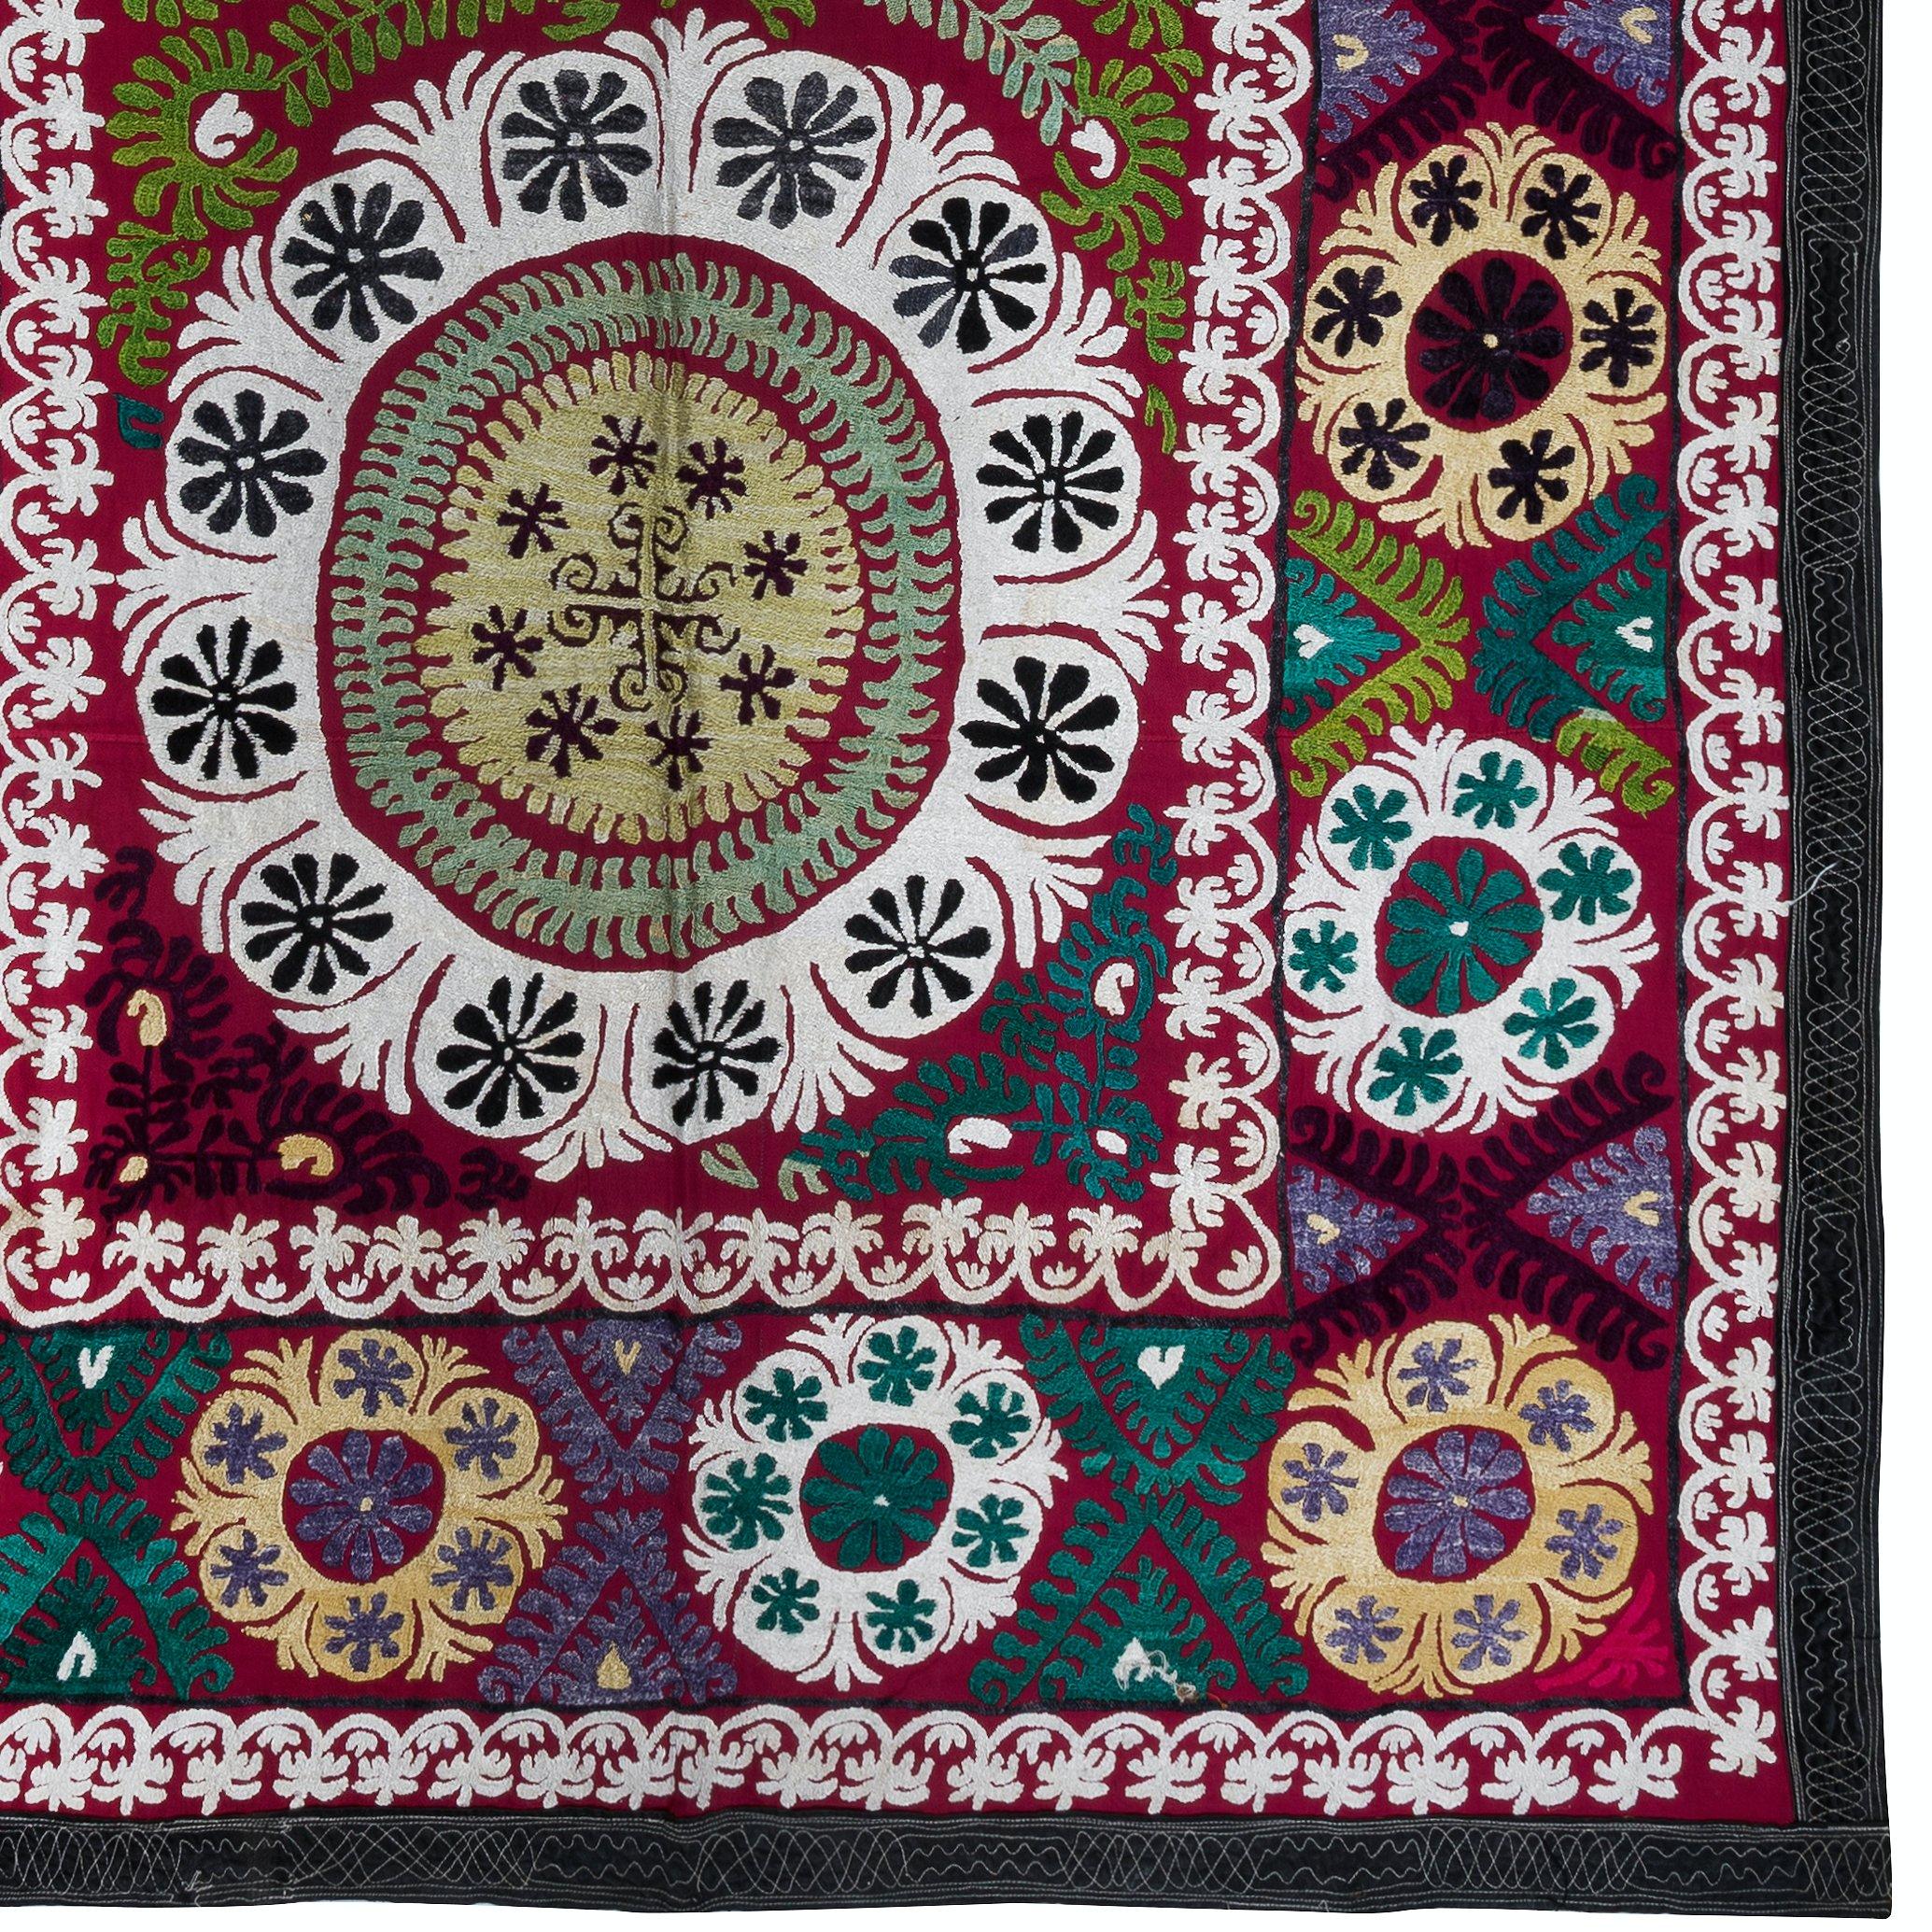 Uzbek 5x8.7 ft Silk Hand Embroidered Wall Hanging, Vintage Colorful Suzani Bed Cover For Sale